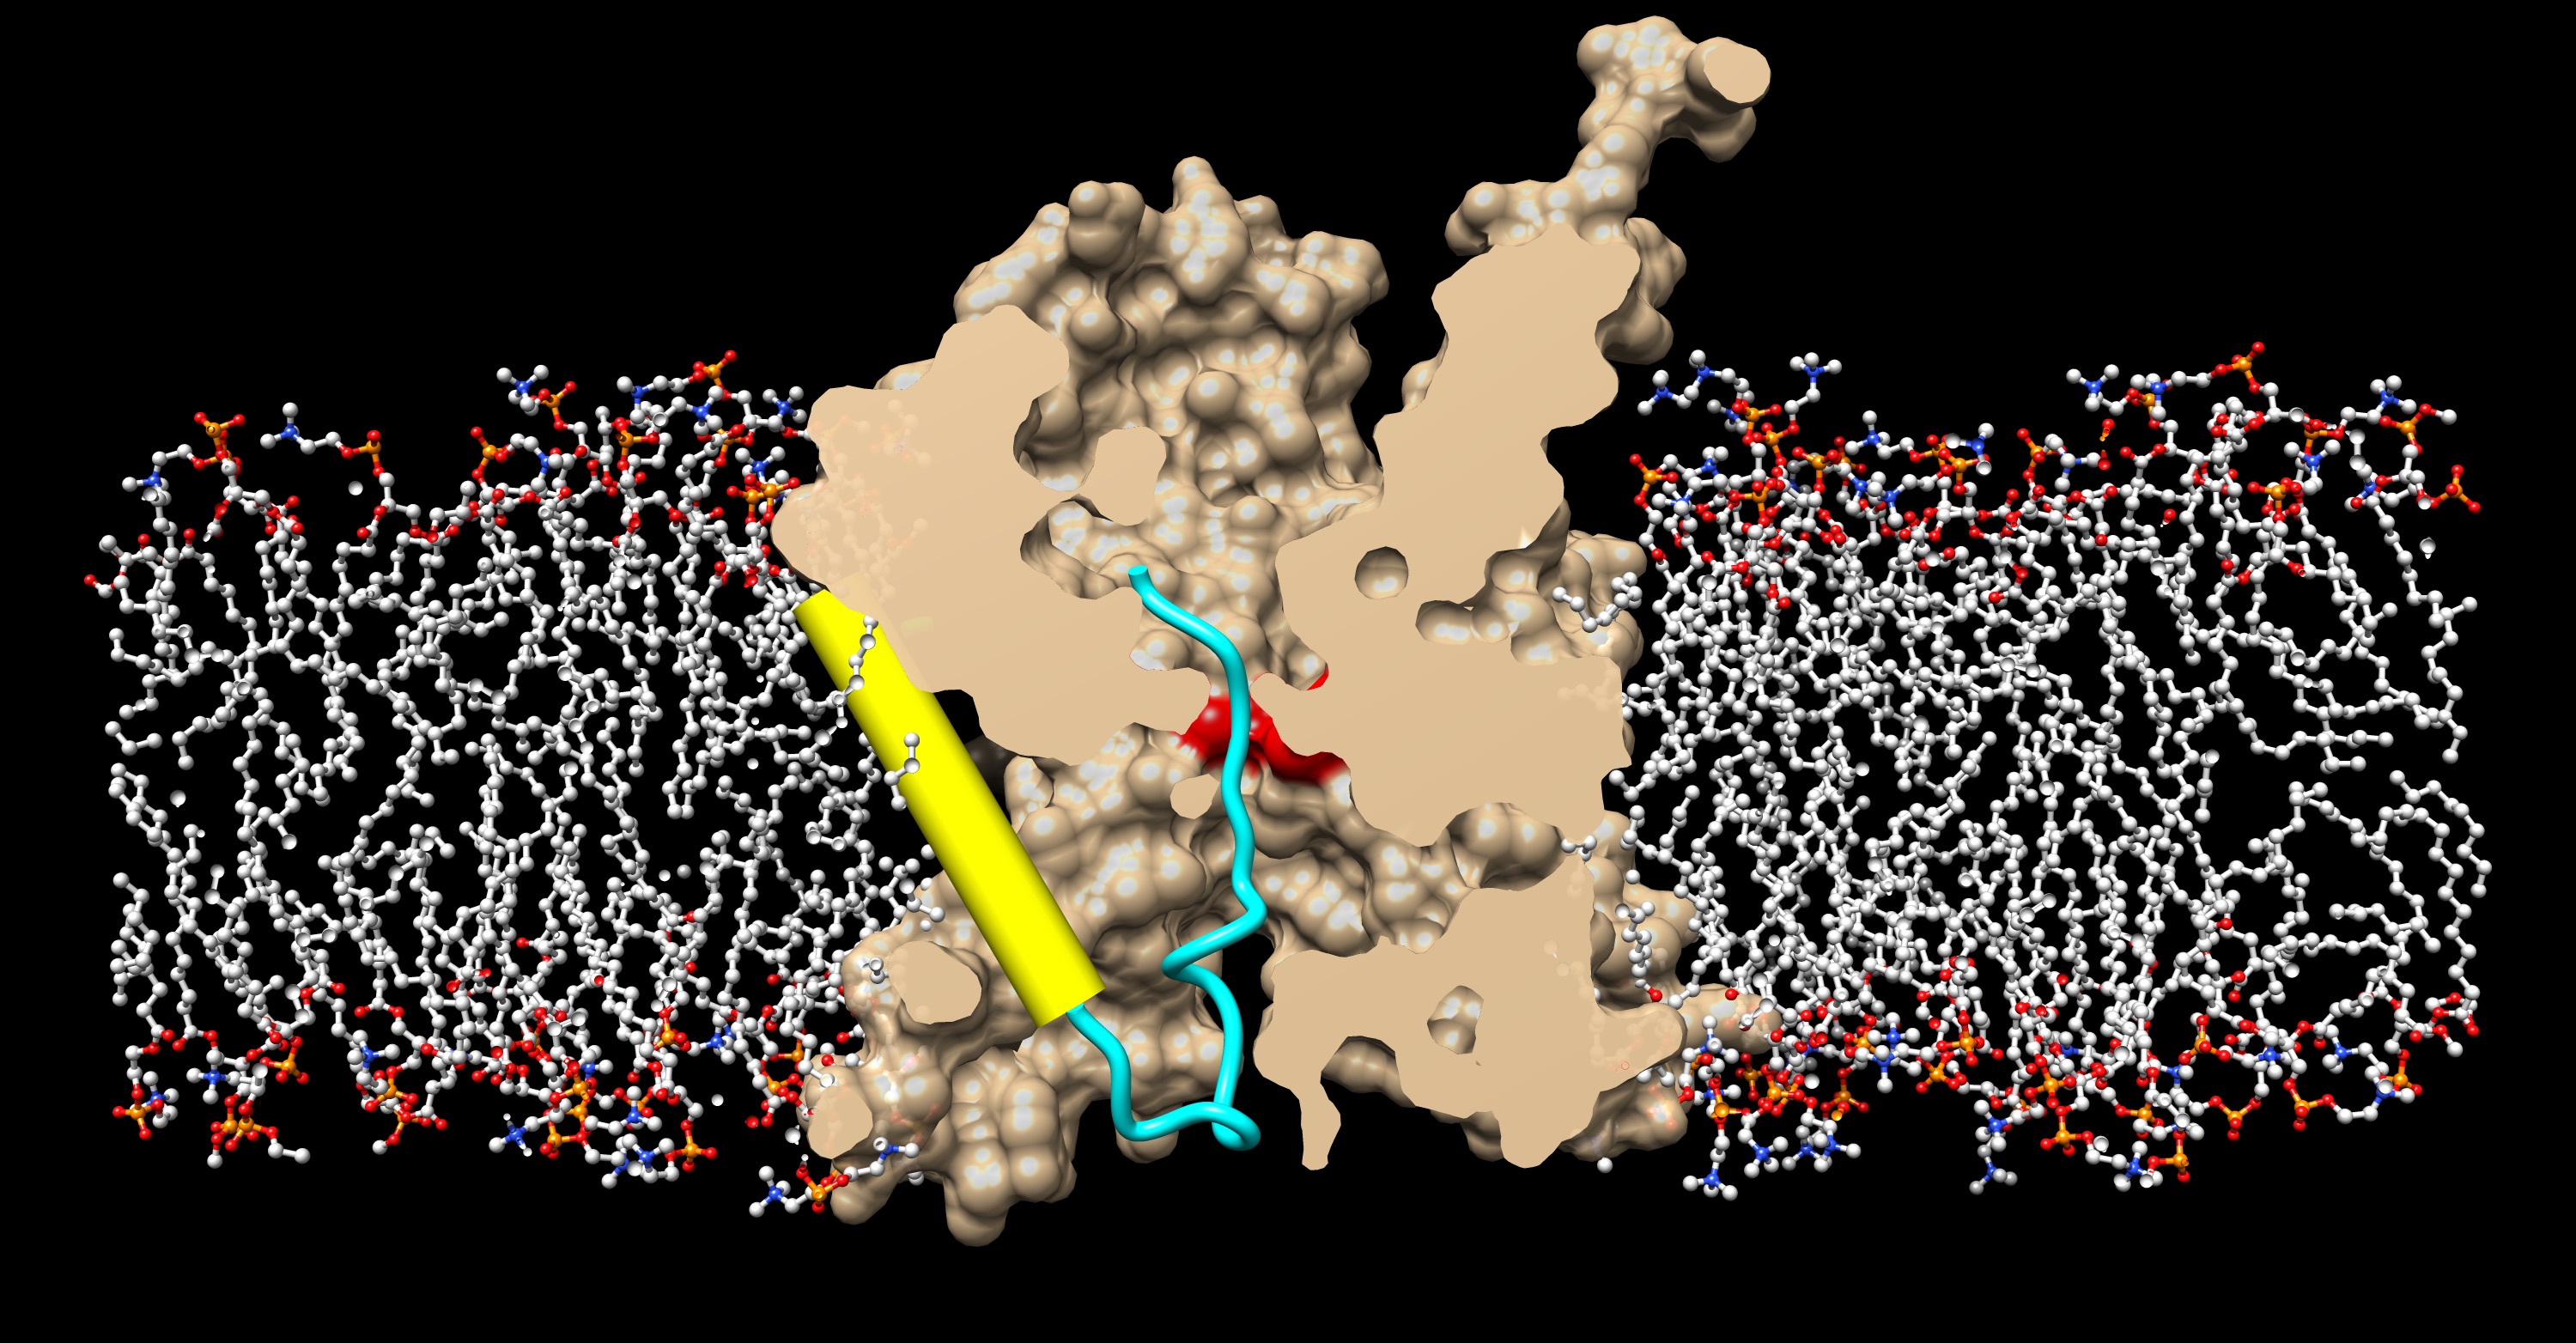 Crystal structure of active protein translocation channel